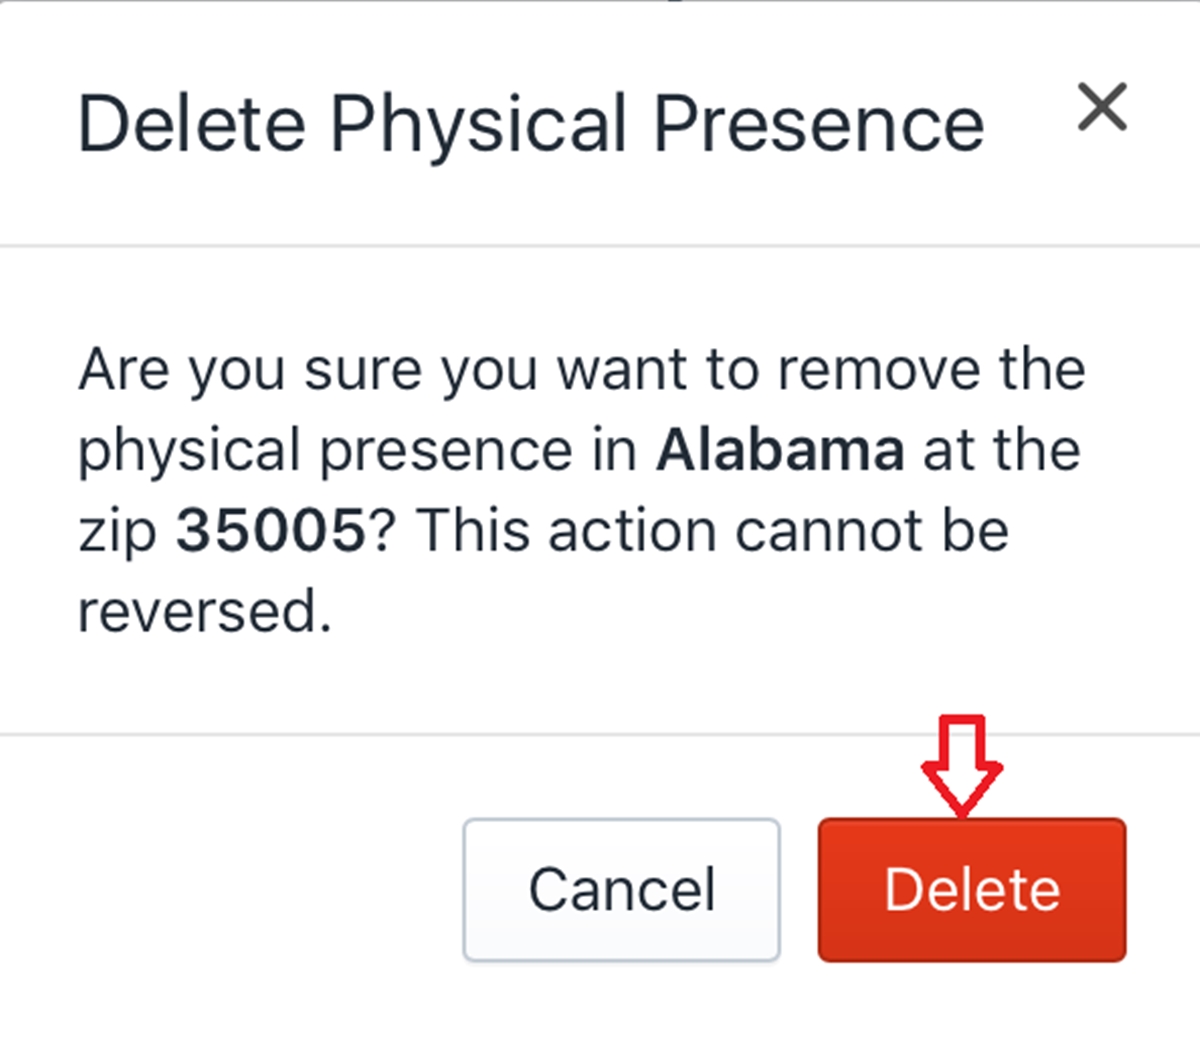 How to remove a physical presence